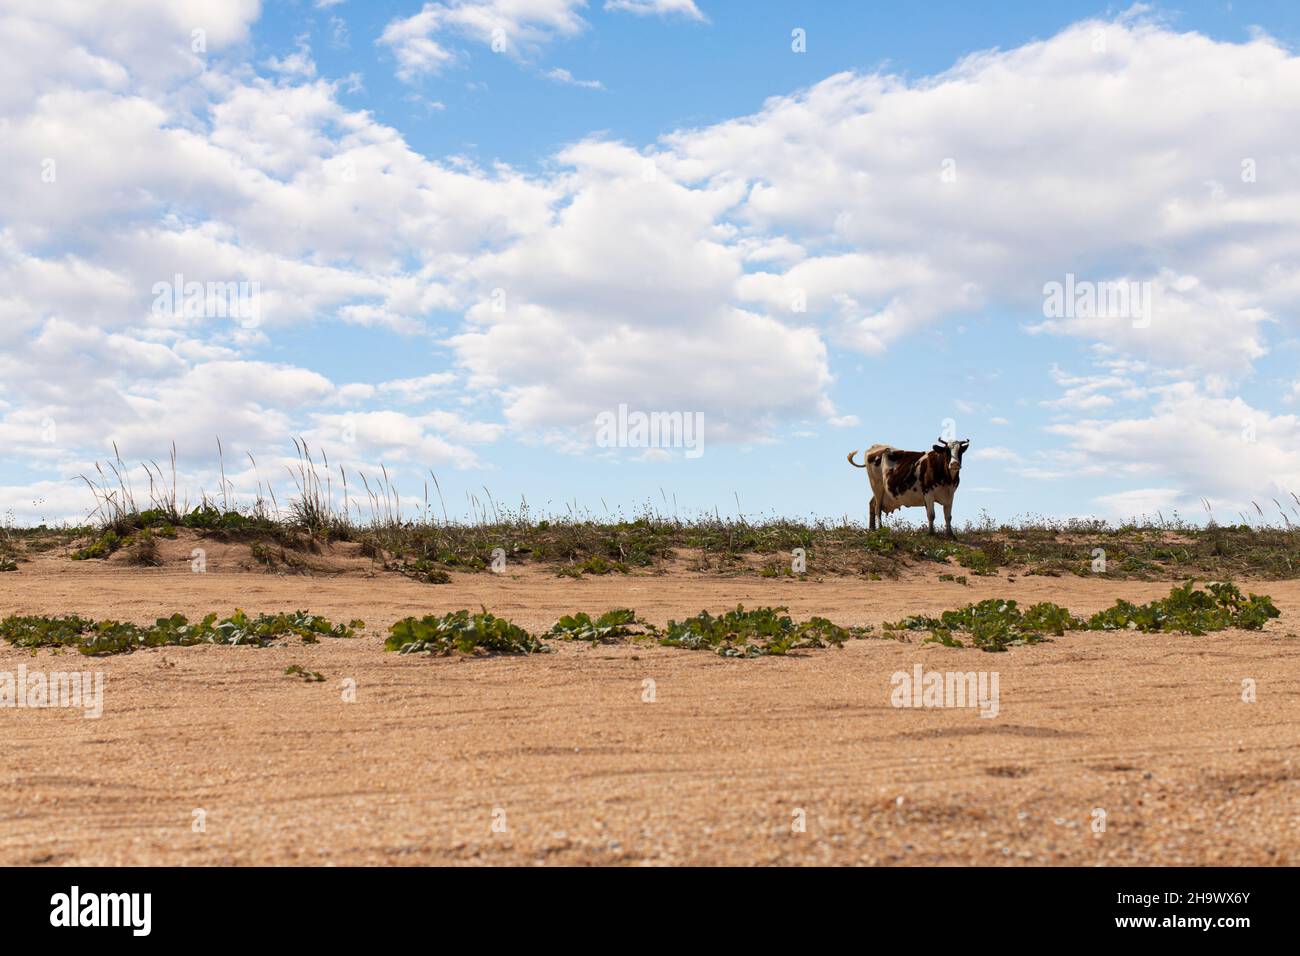 A white-brown cow stands by the beach against the background of grass and sky. Front view. Stock Photo